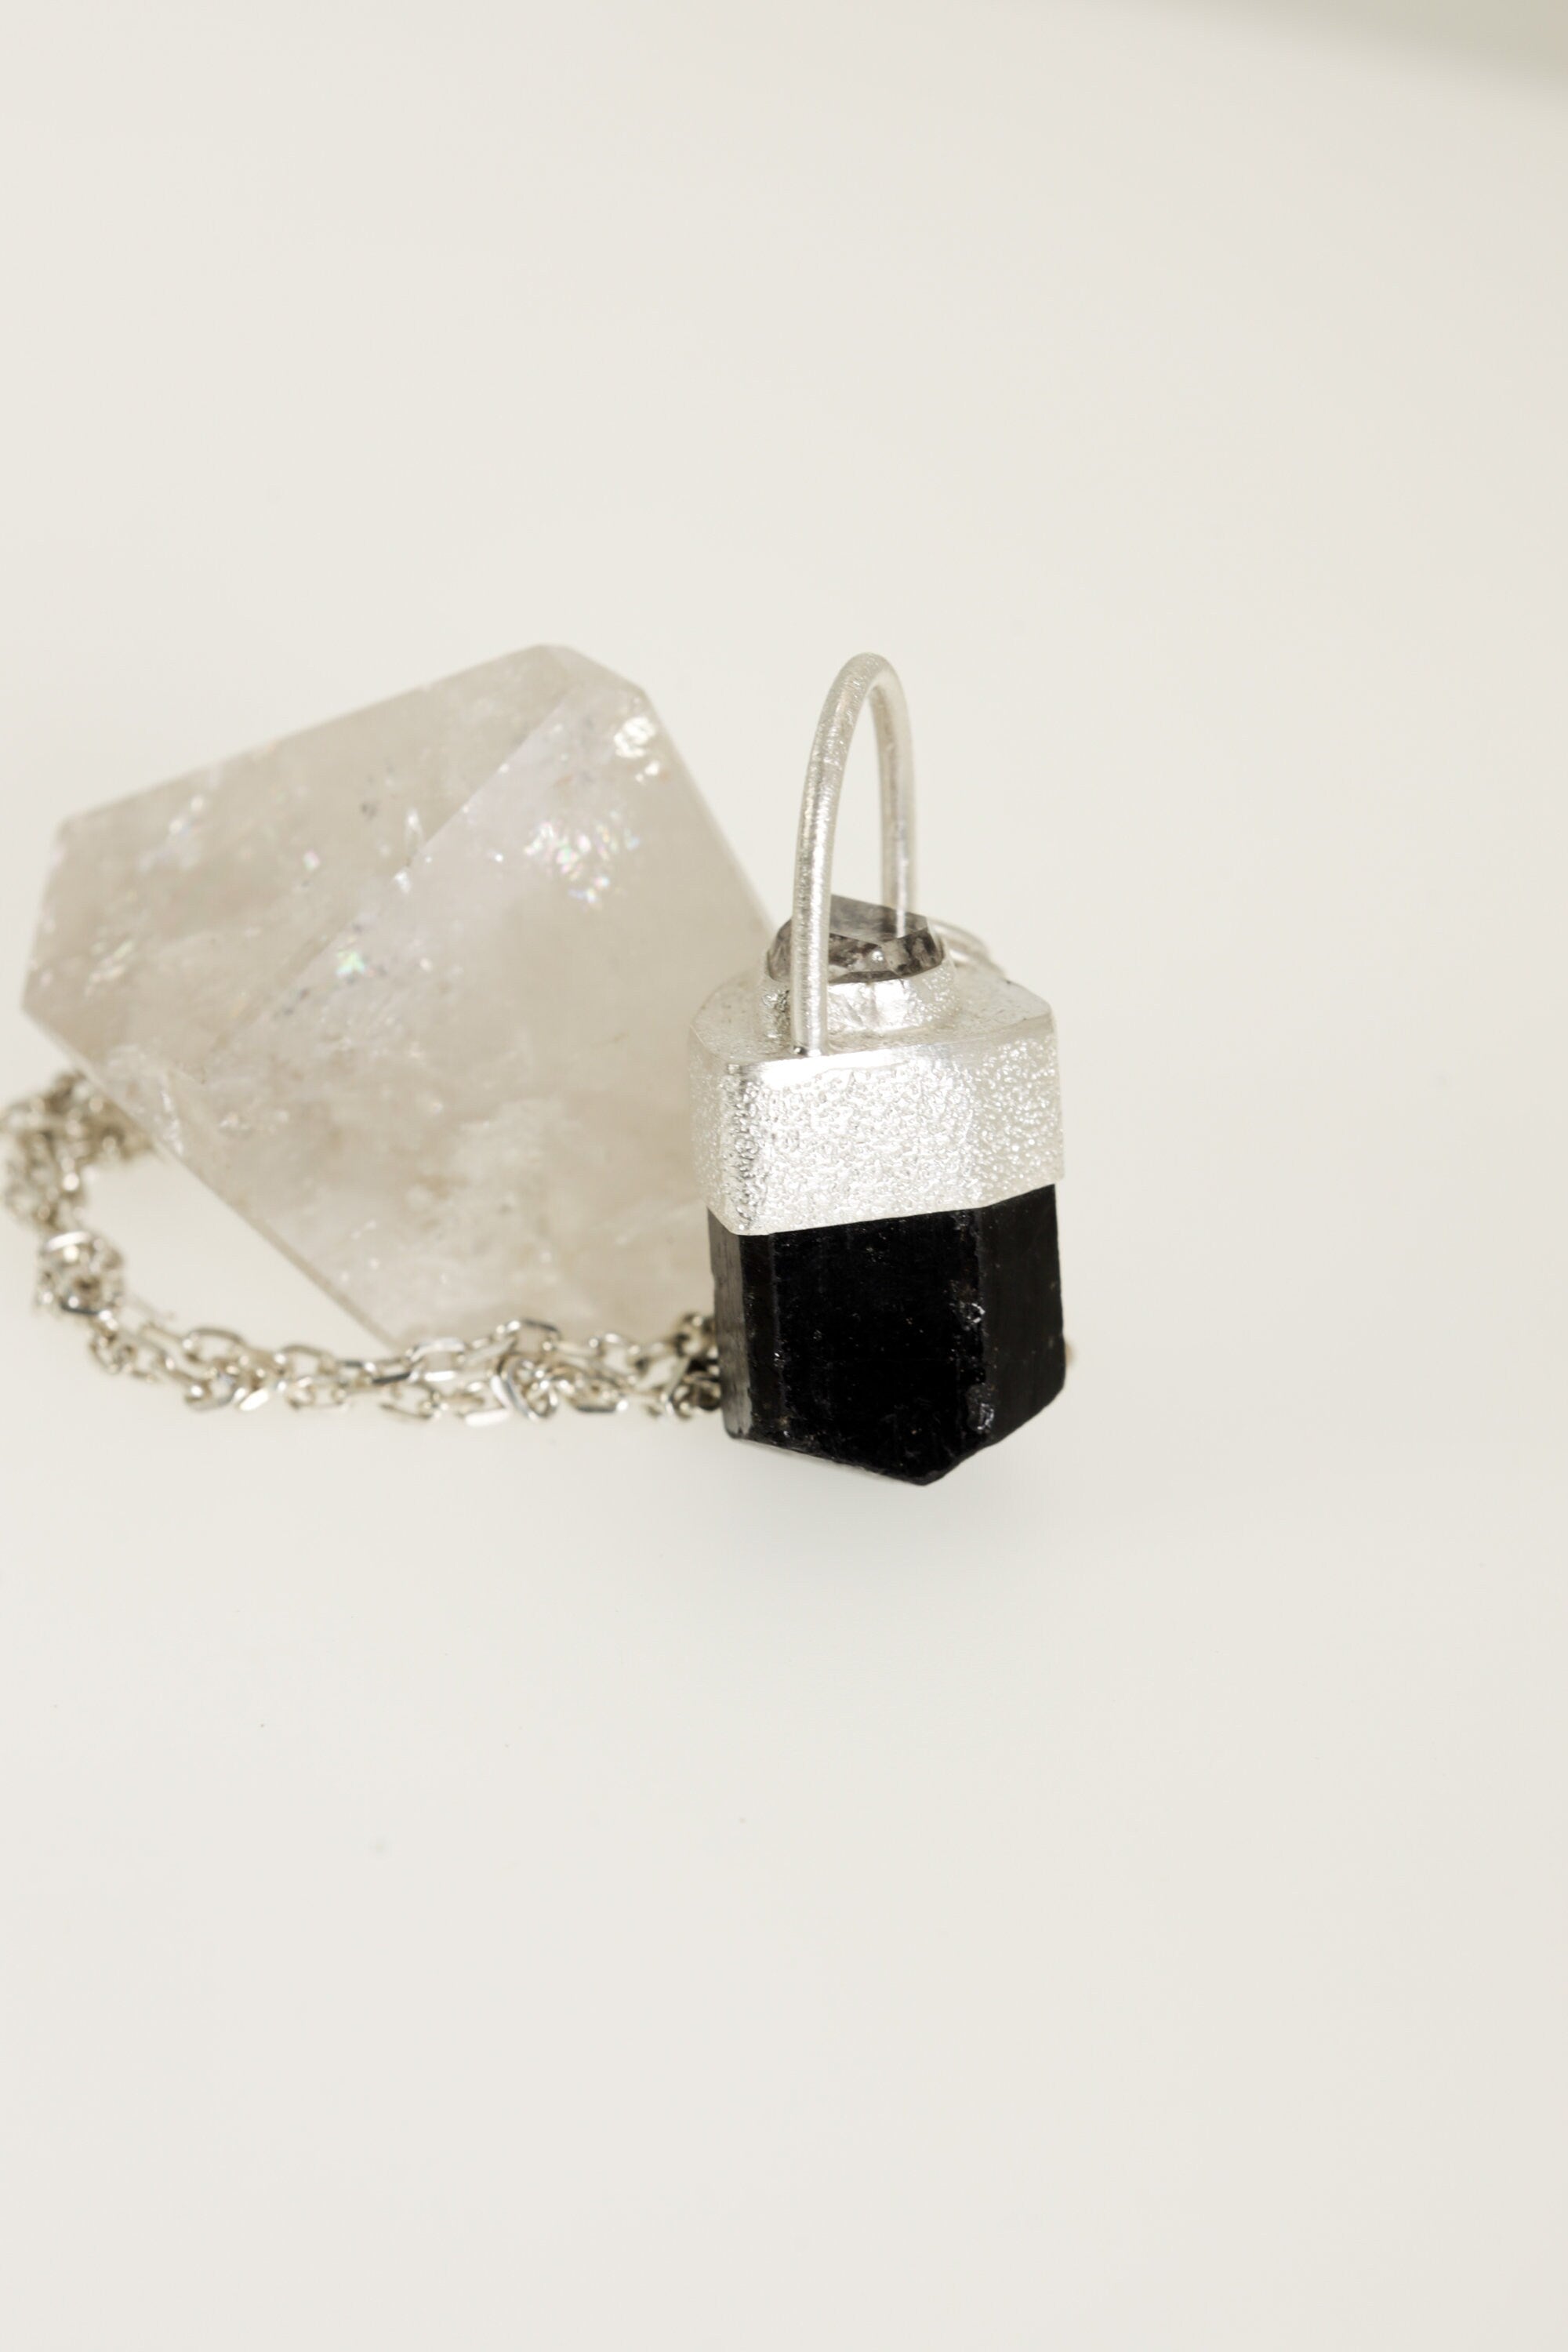 Earthen Brilliance: Sterling Silver Pendant with Himalayan Terminated Brown Dravite Tourmaline and Diamond - Sand Texture Finish - NO/06